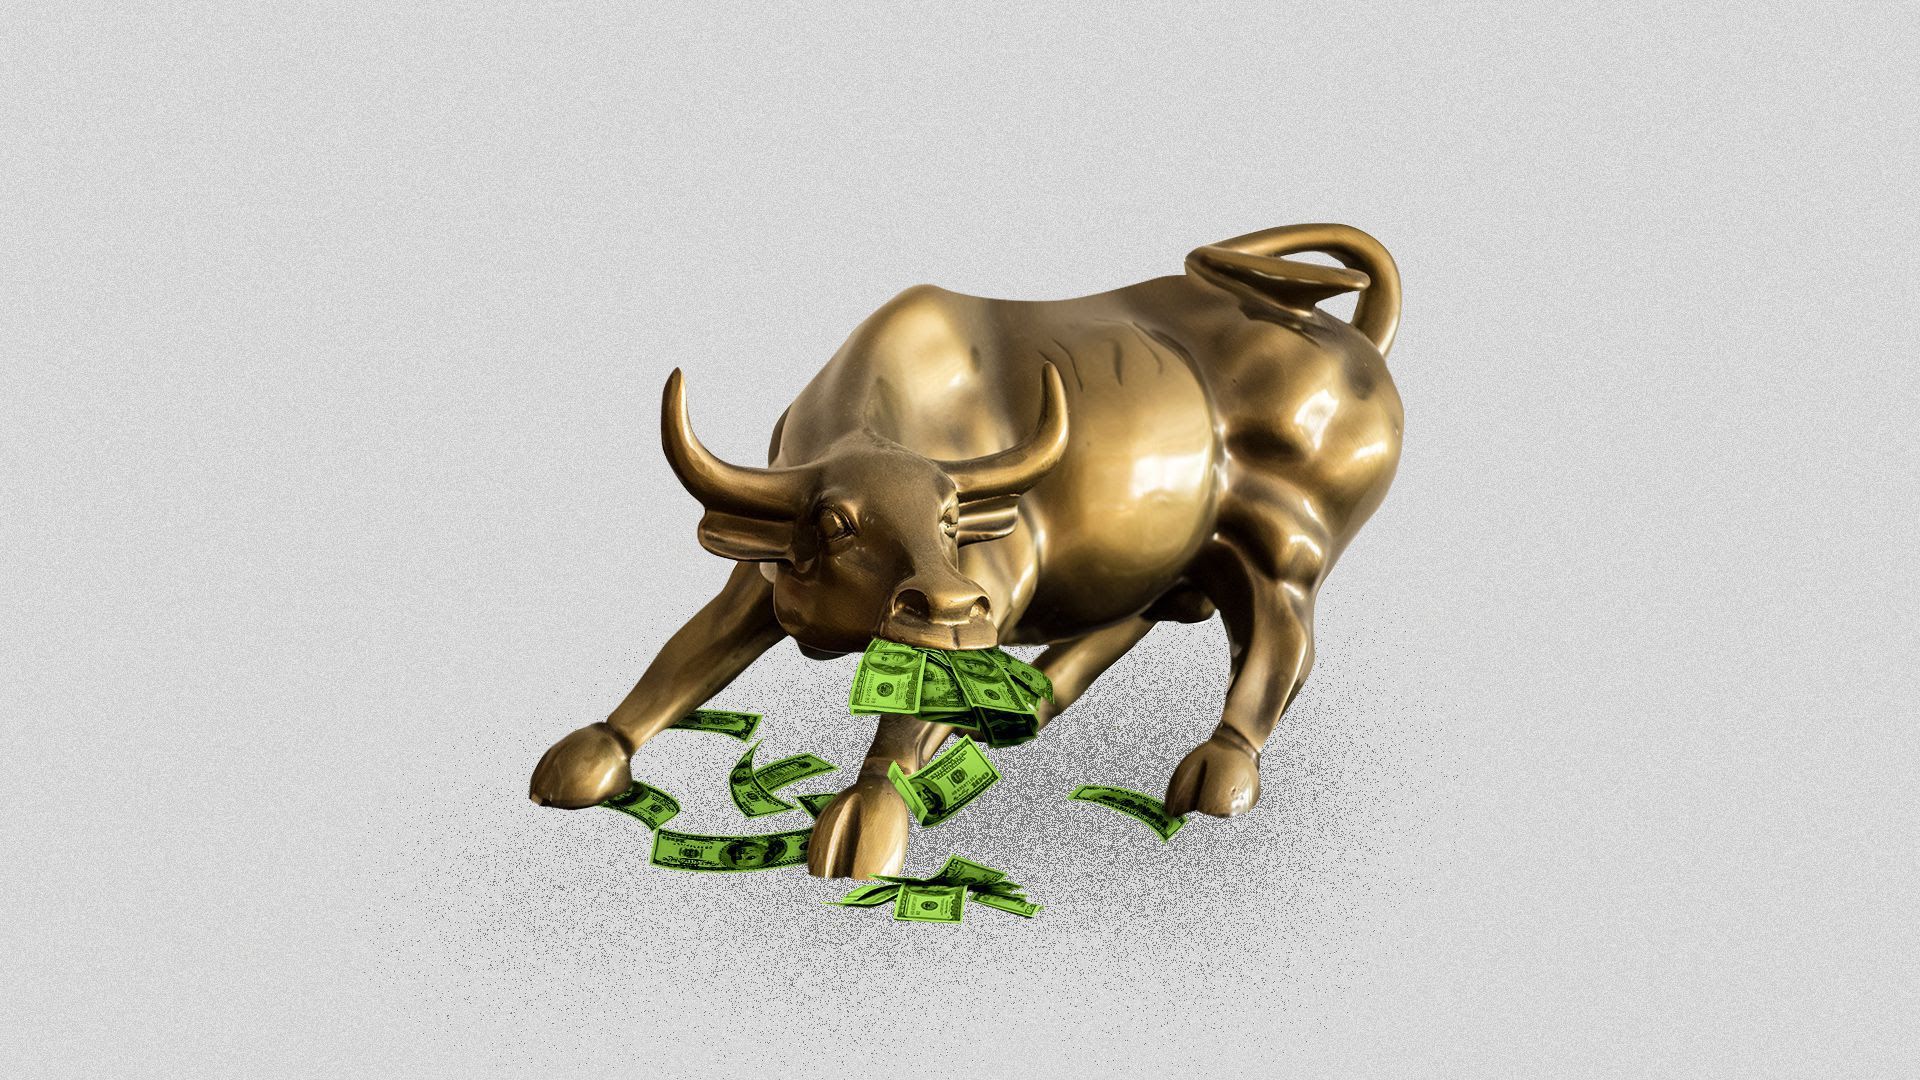 Illustration of a the Wall Street Bull with money falling out of its mouth